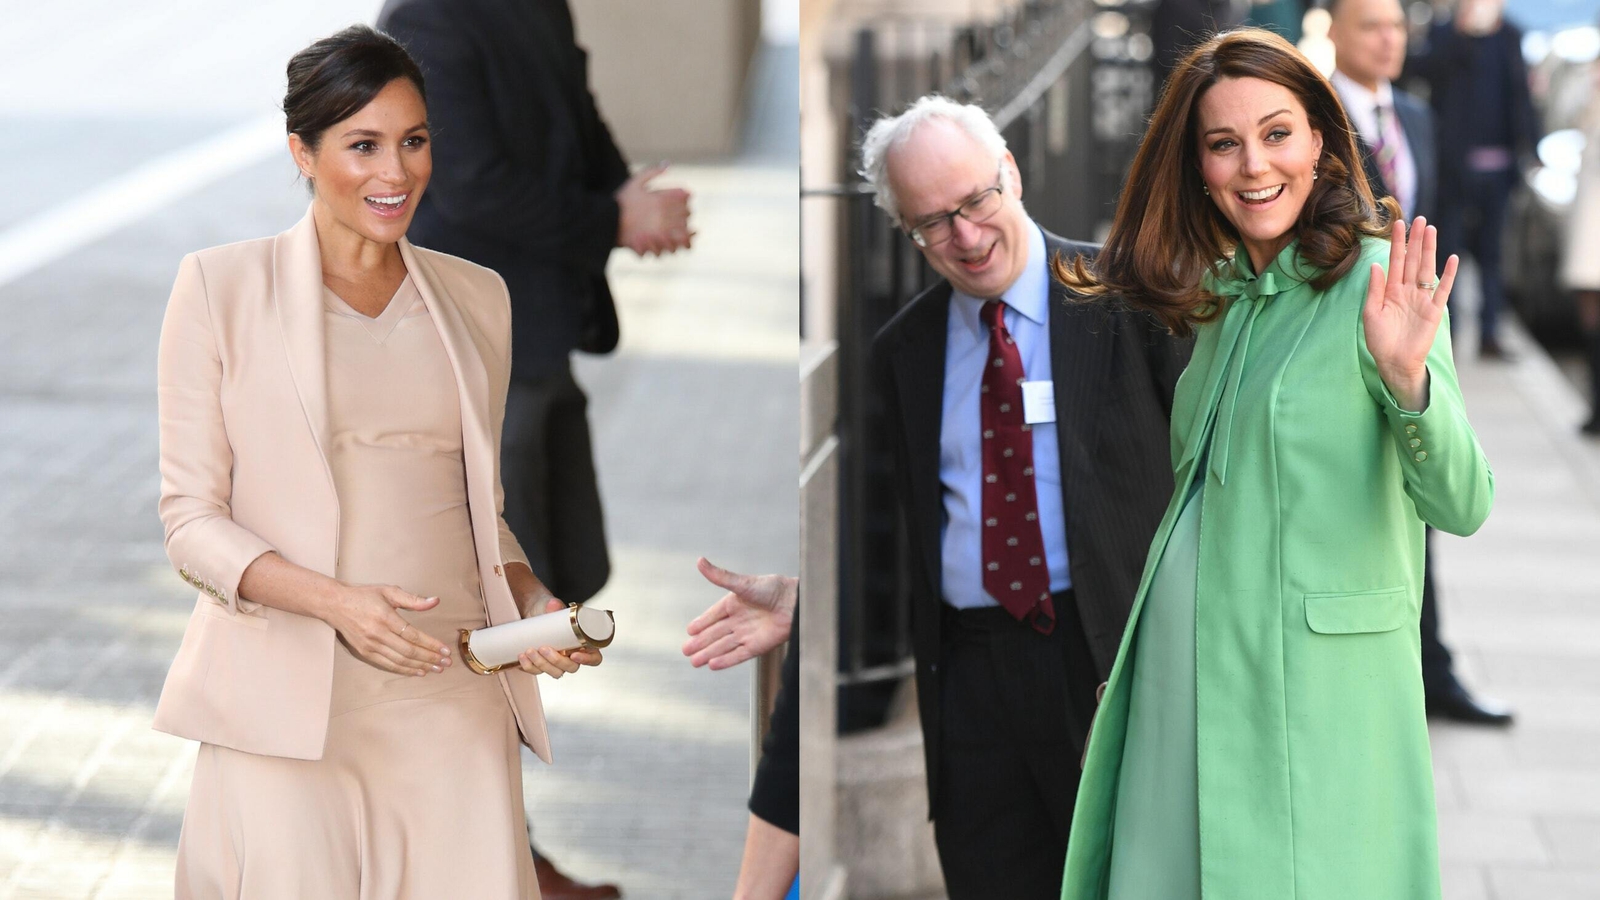 The difference between Meghan and Kate's maternity styles